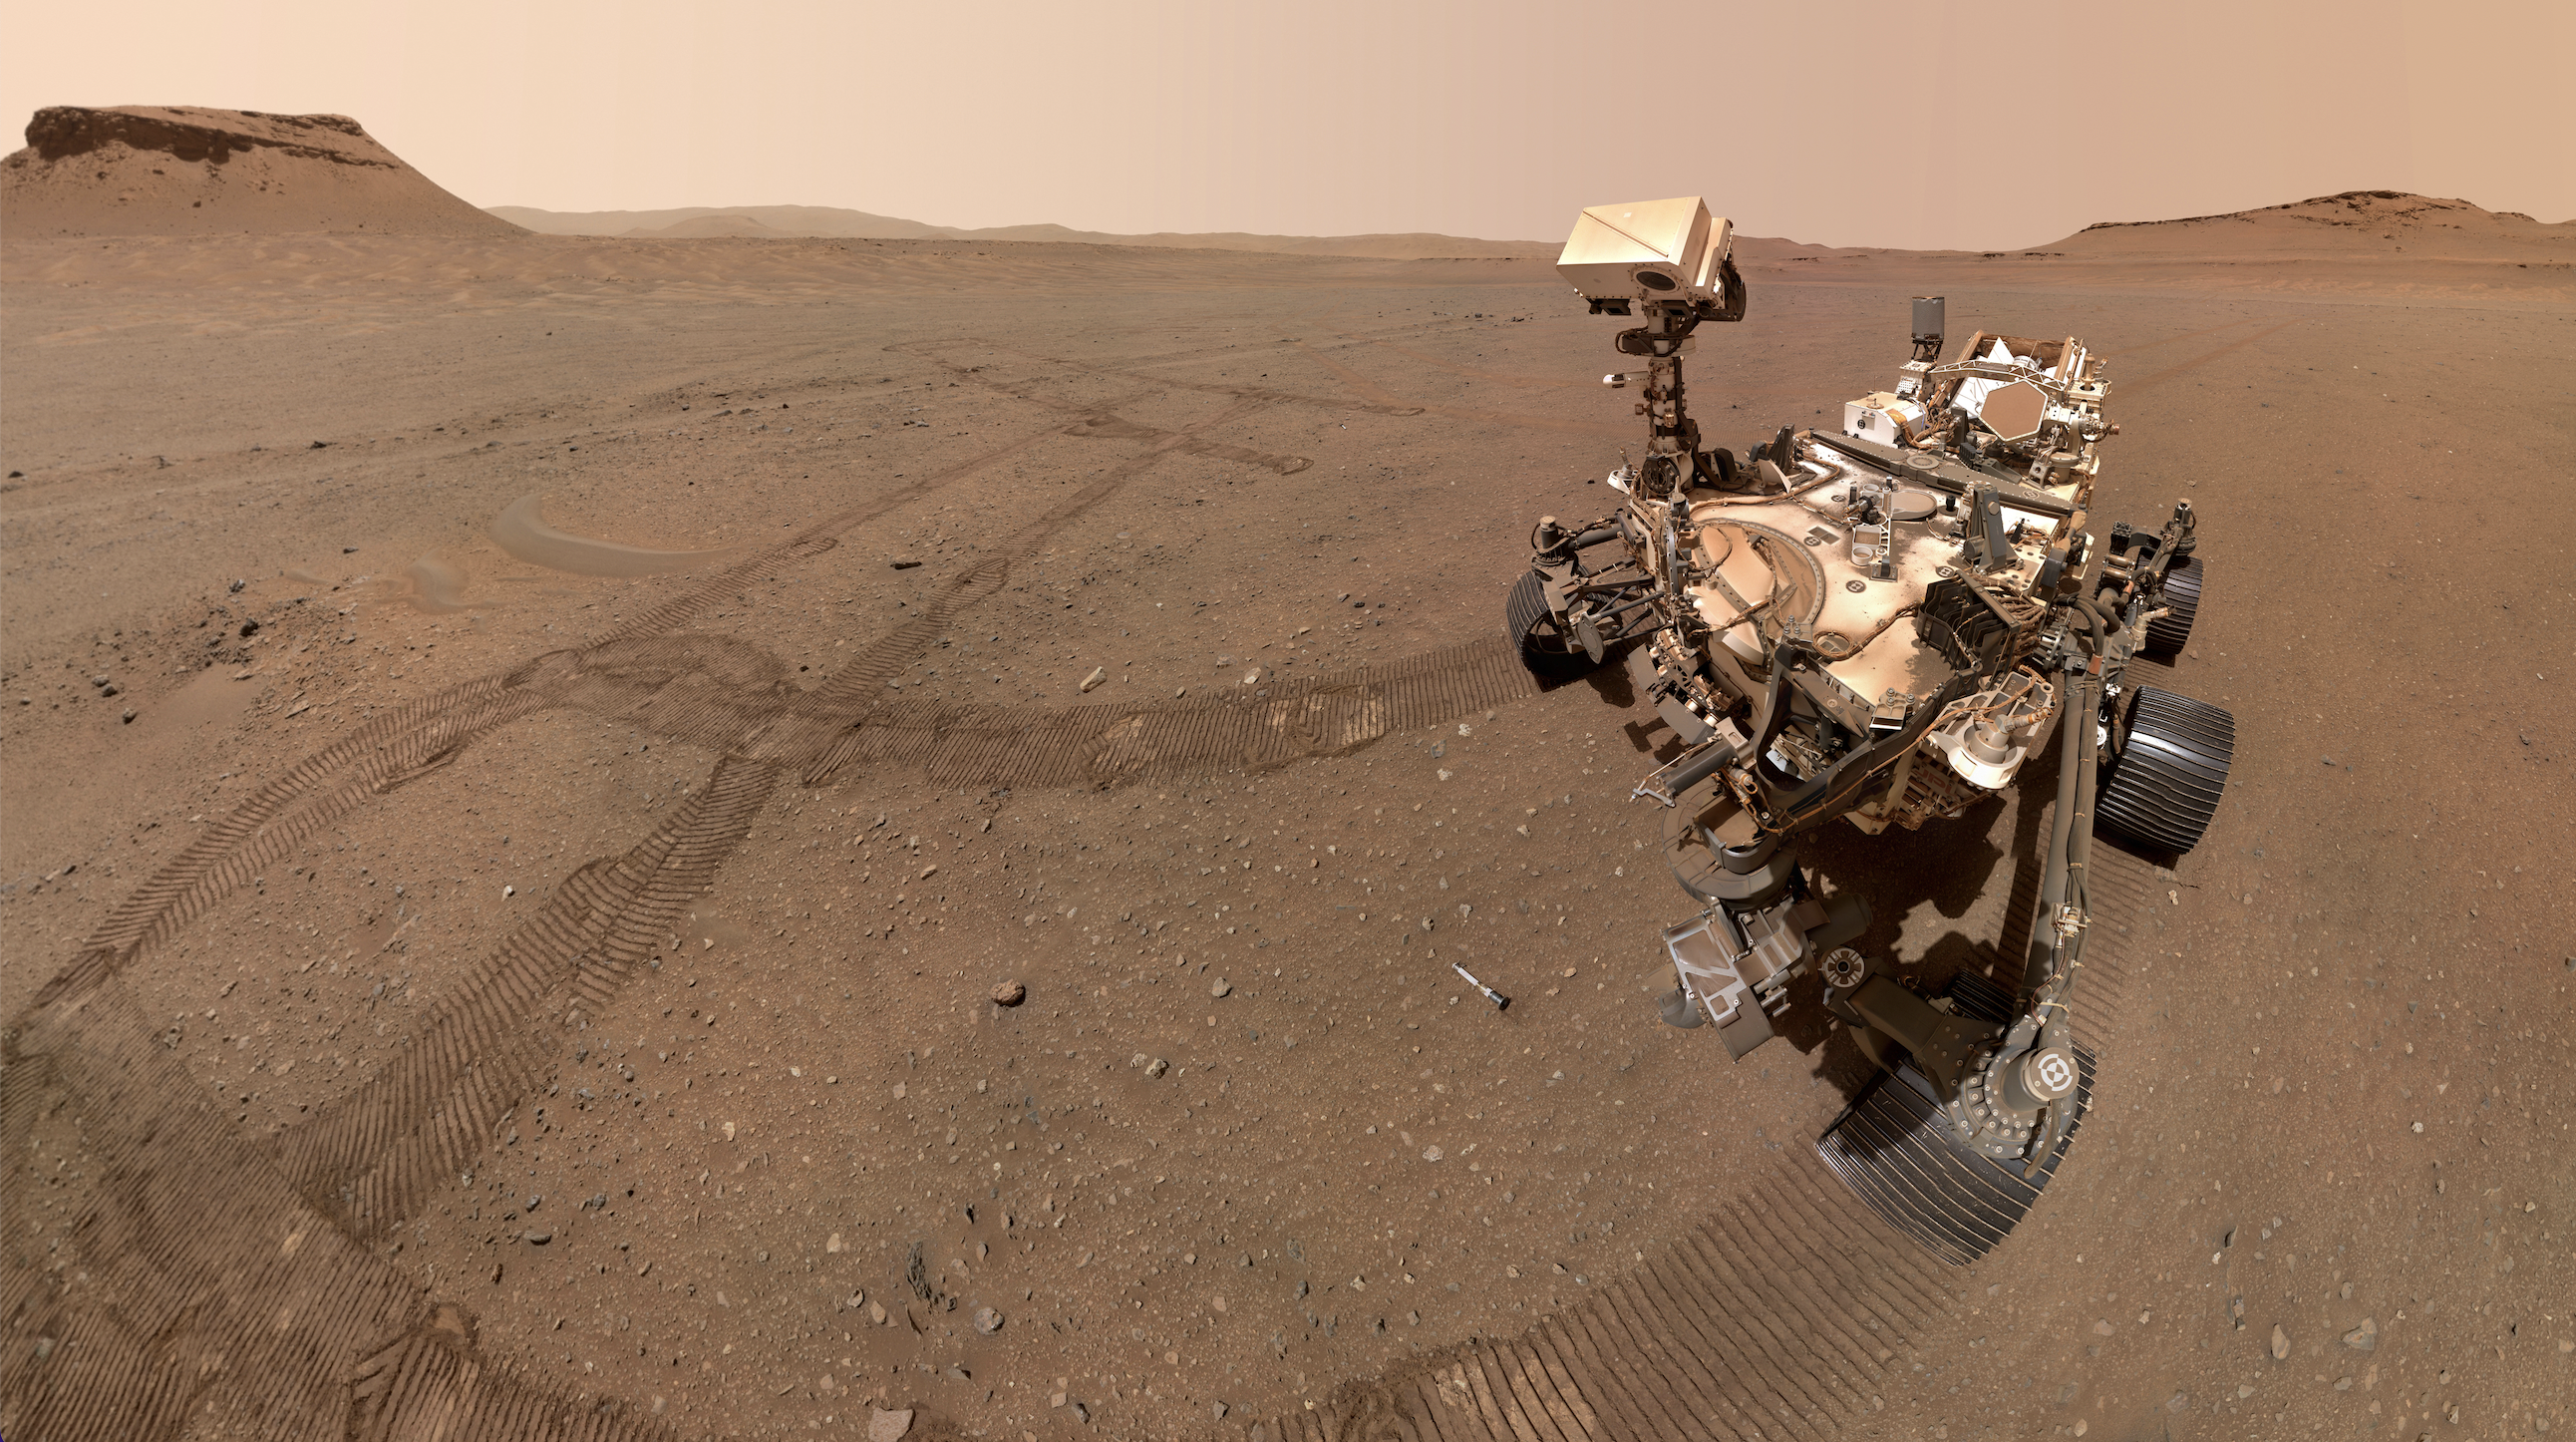 If the Perseverance rover found evidence of life on Mars, would we recognize it?